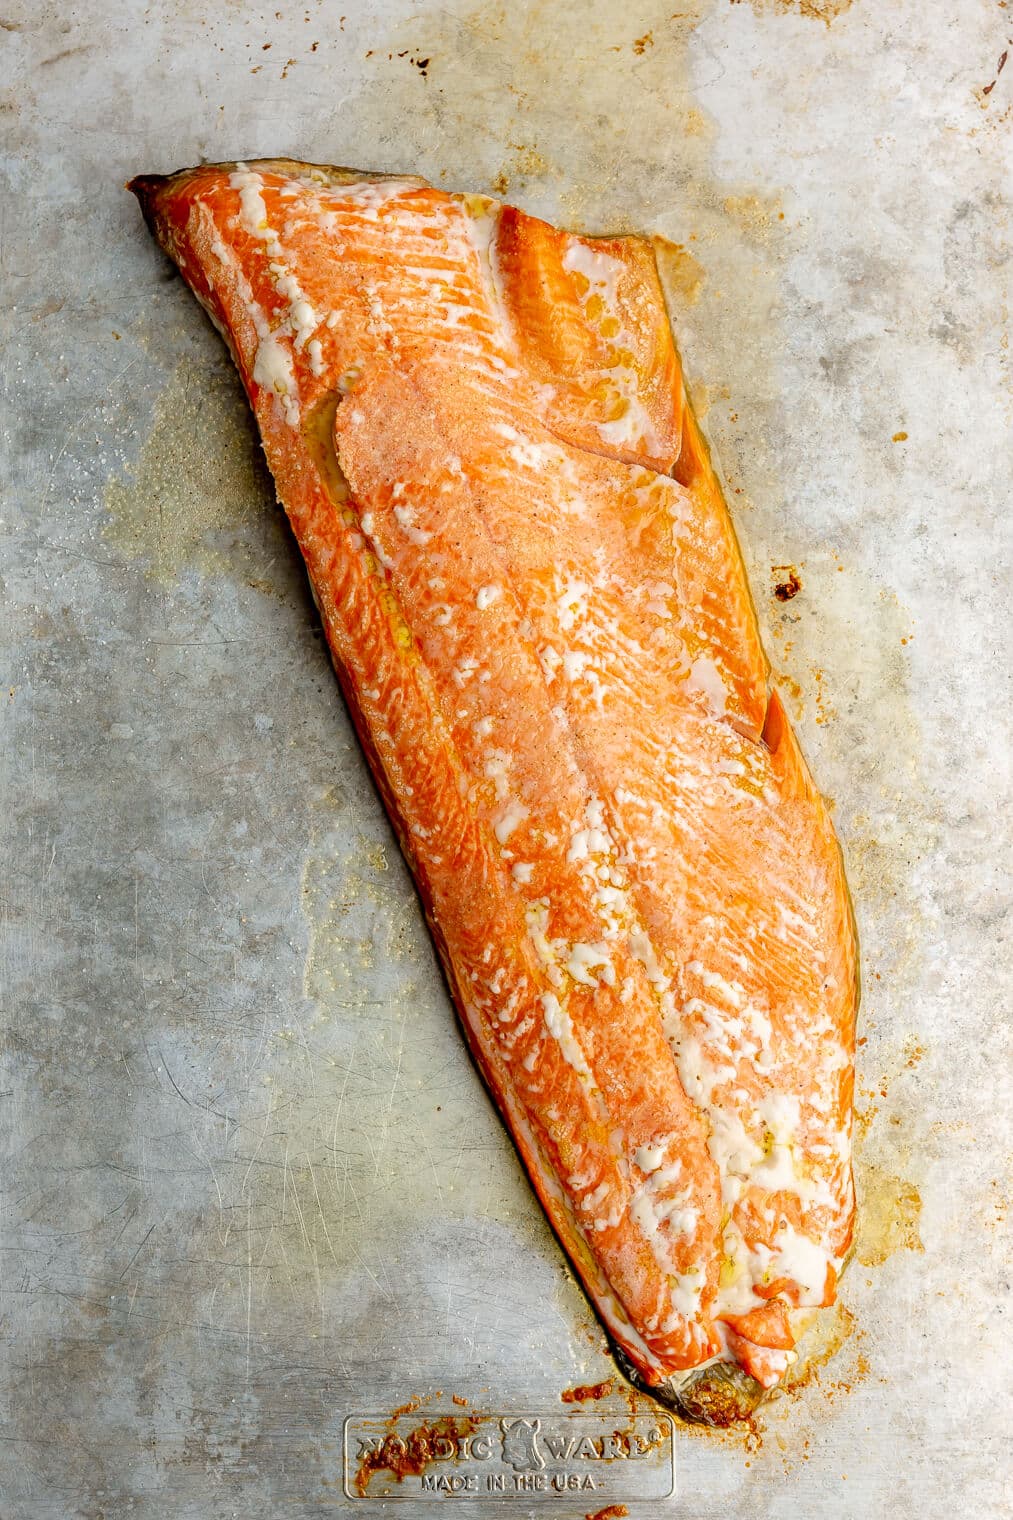 A large cooked filet of salmon on a sheet pan.